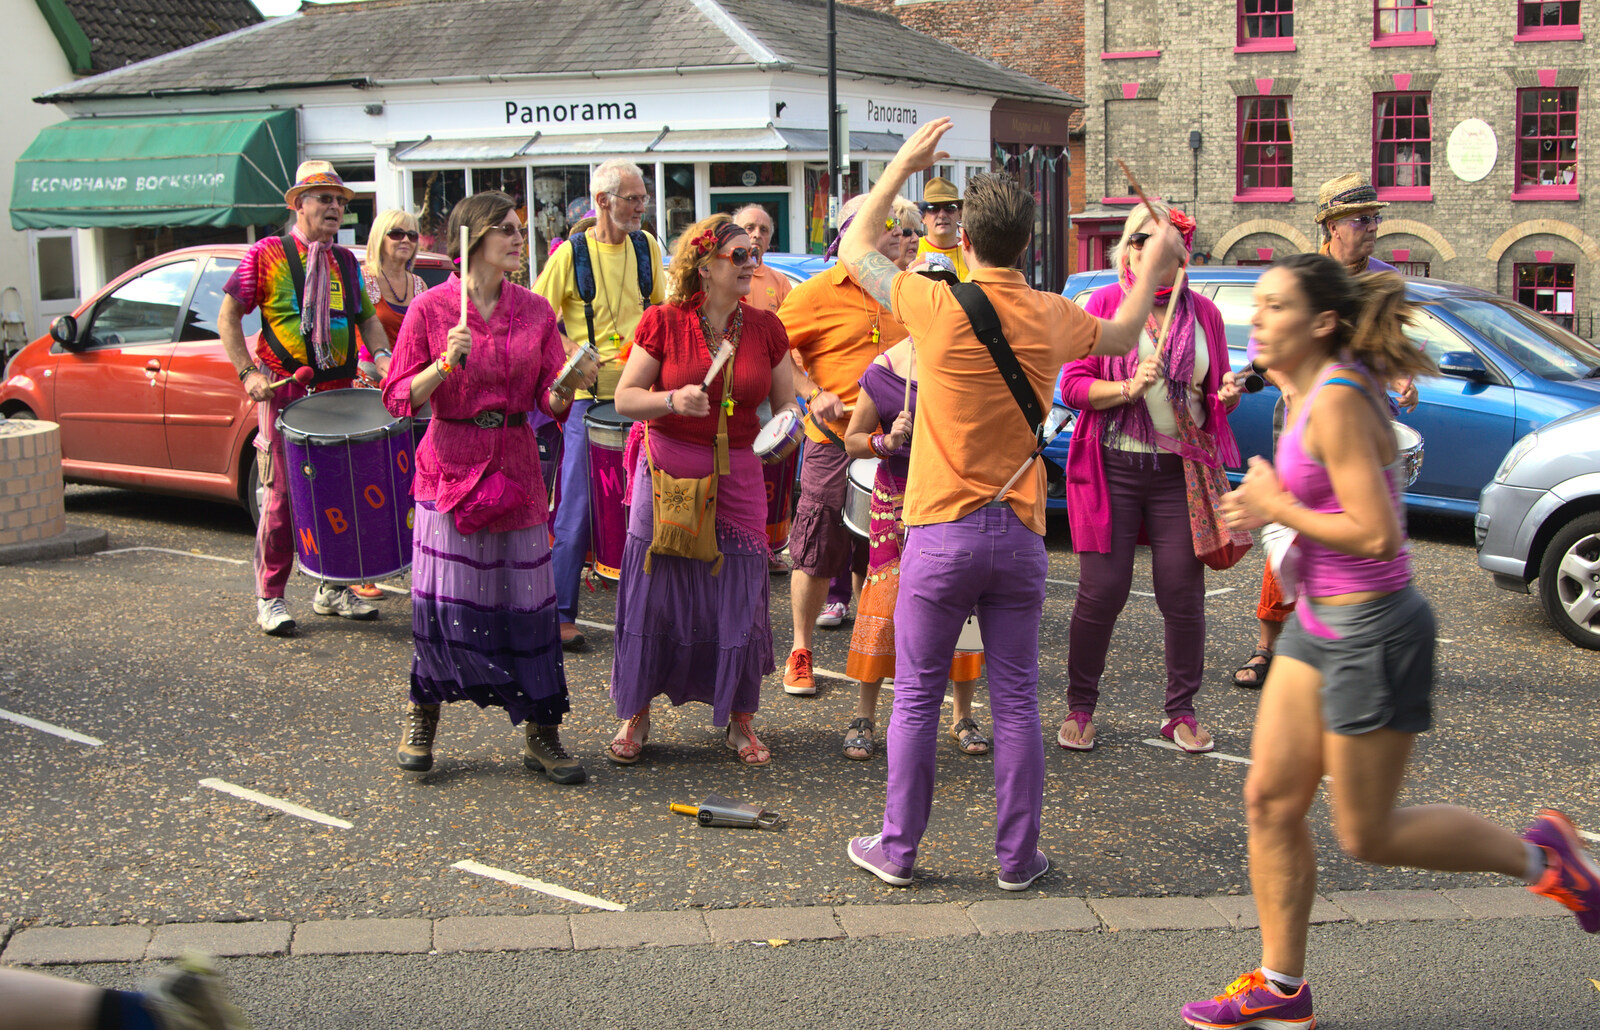 A Samba band keeps the runners entertained from The Framlingham 10k Run, Suffolk - 31st August 2014